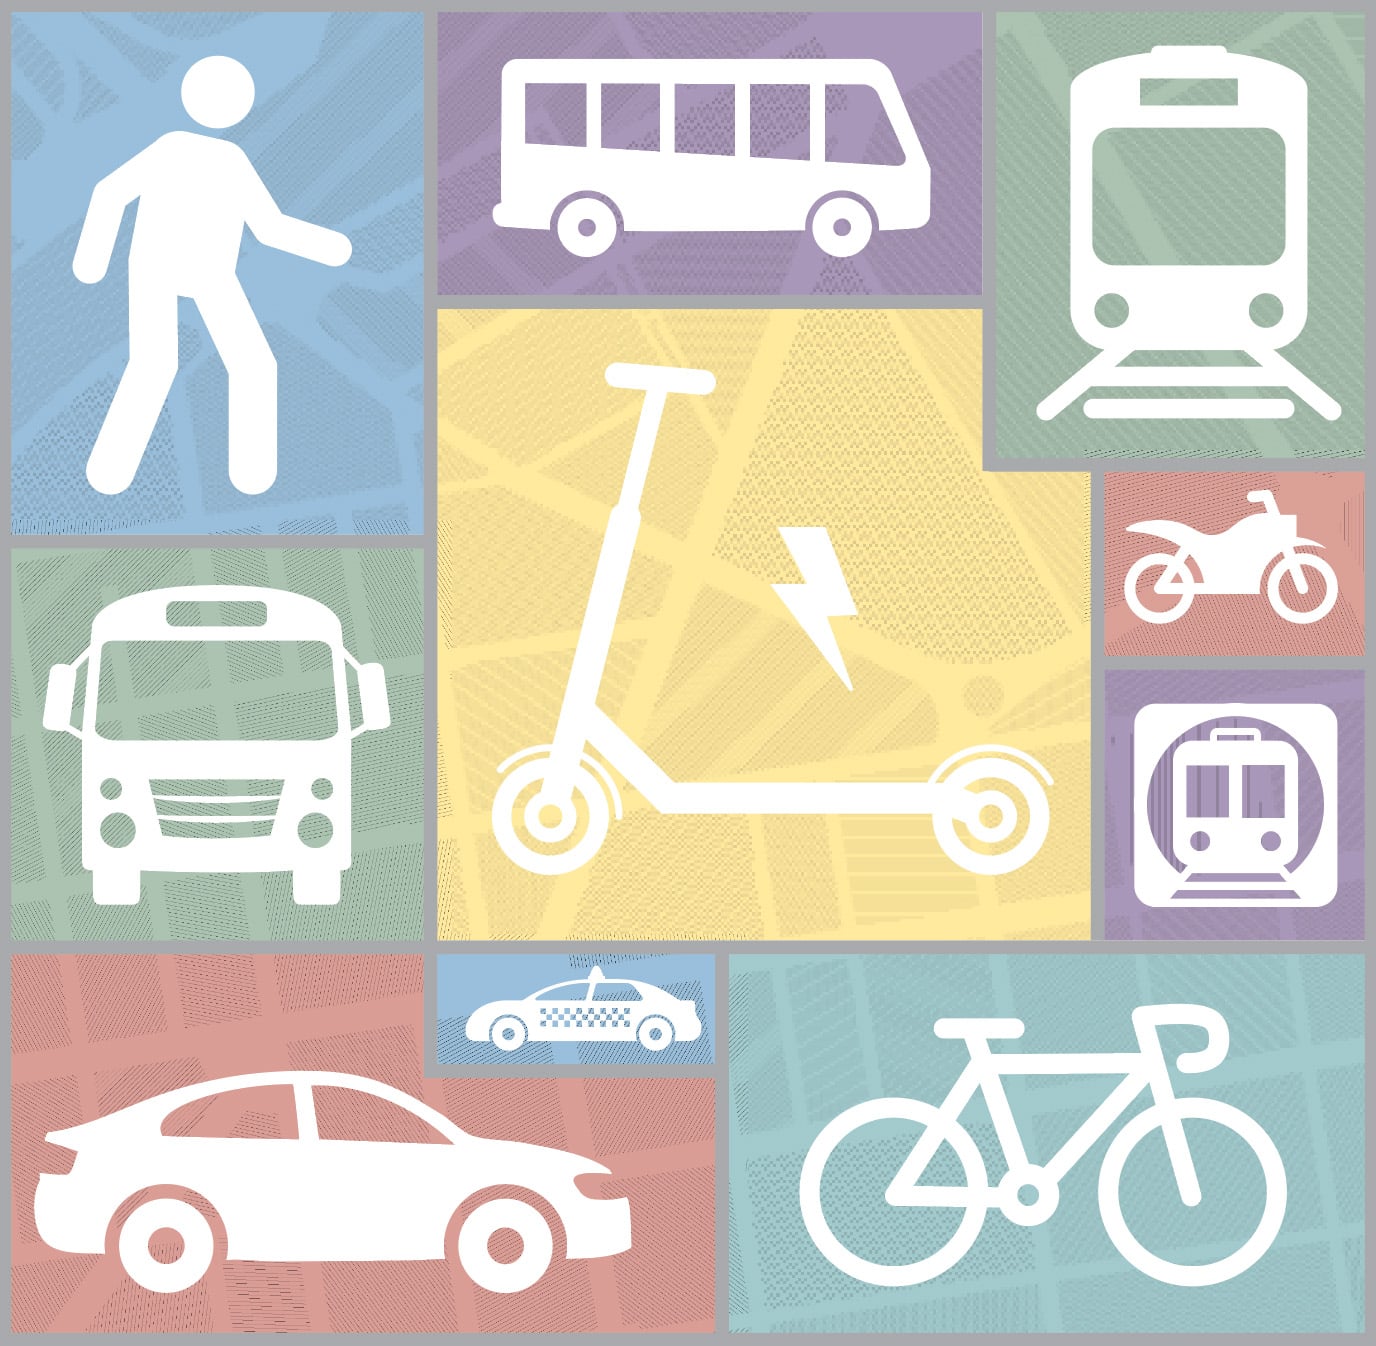 A variety of transportation icons on a colorful background designed by Kevin White.